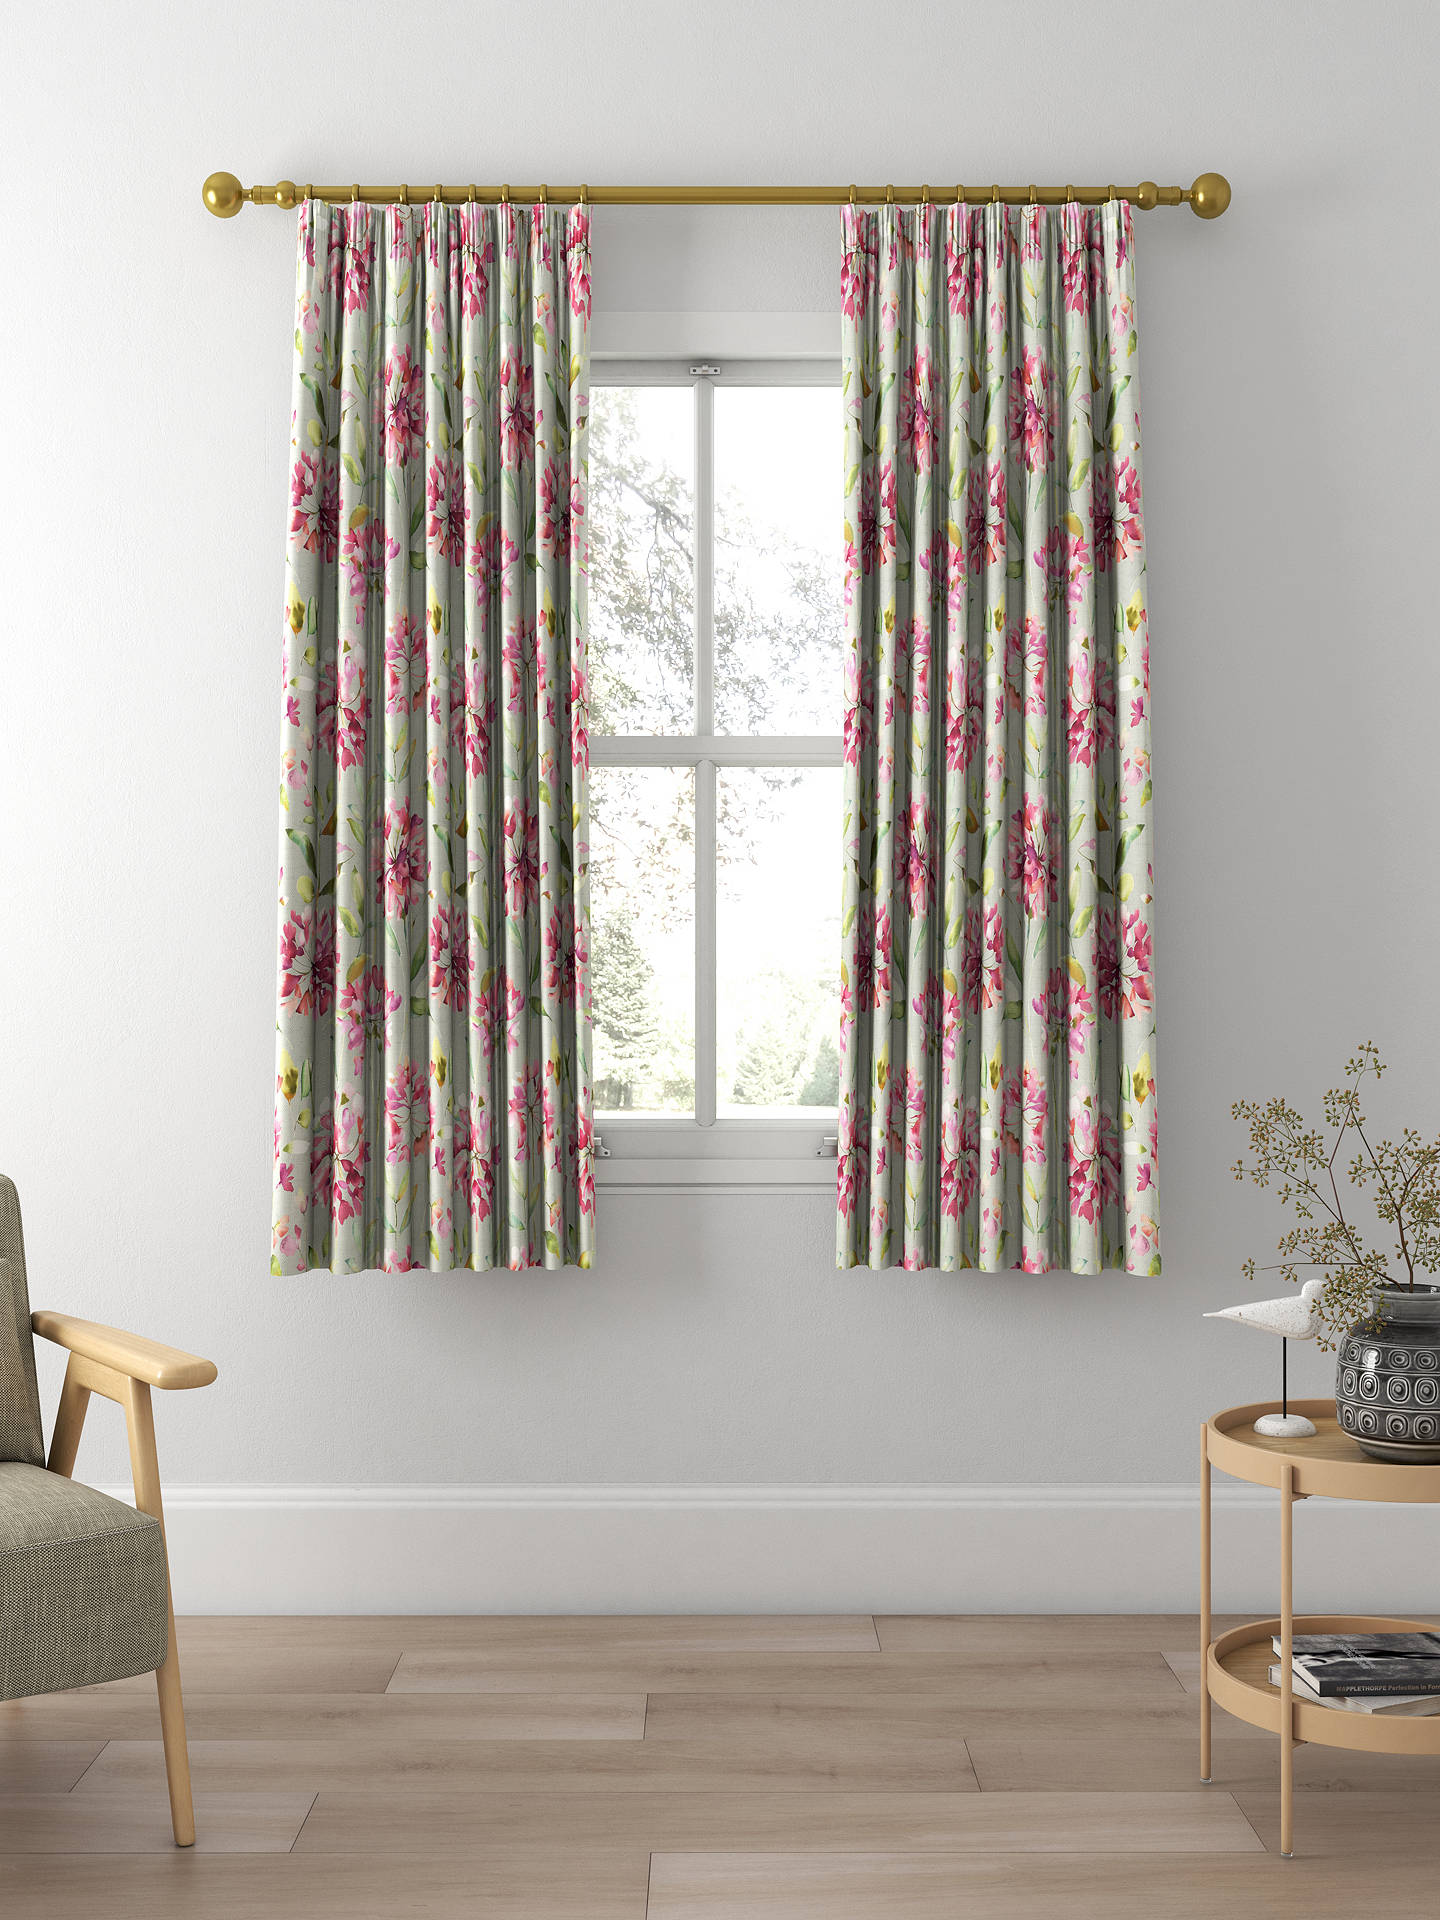 Voyage Clovelly Made to Measure Curtains, Raspberry Stone